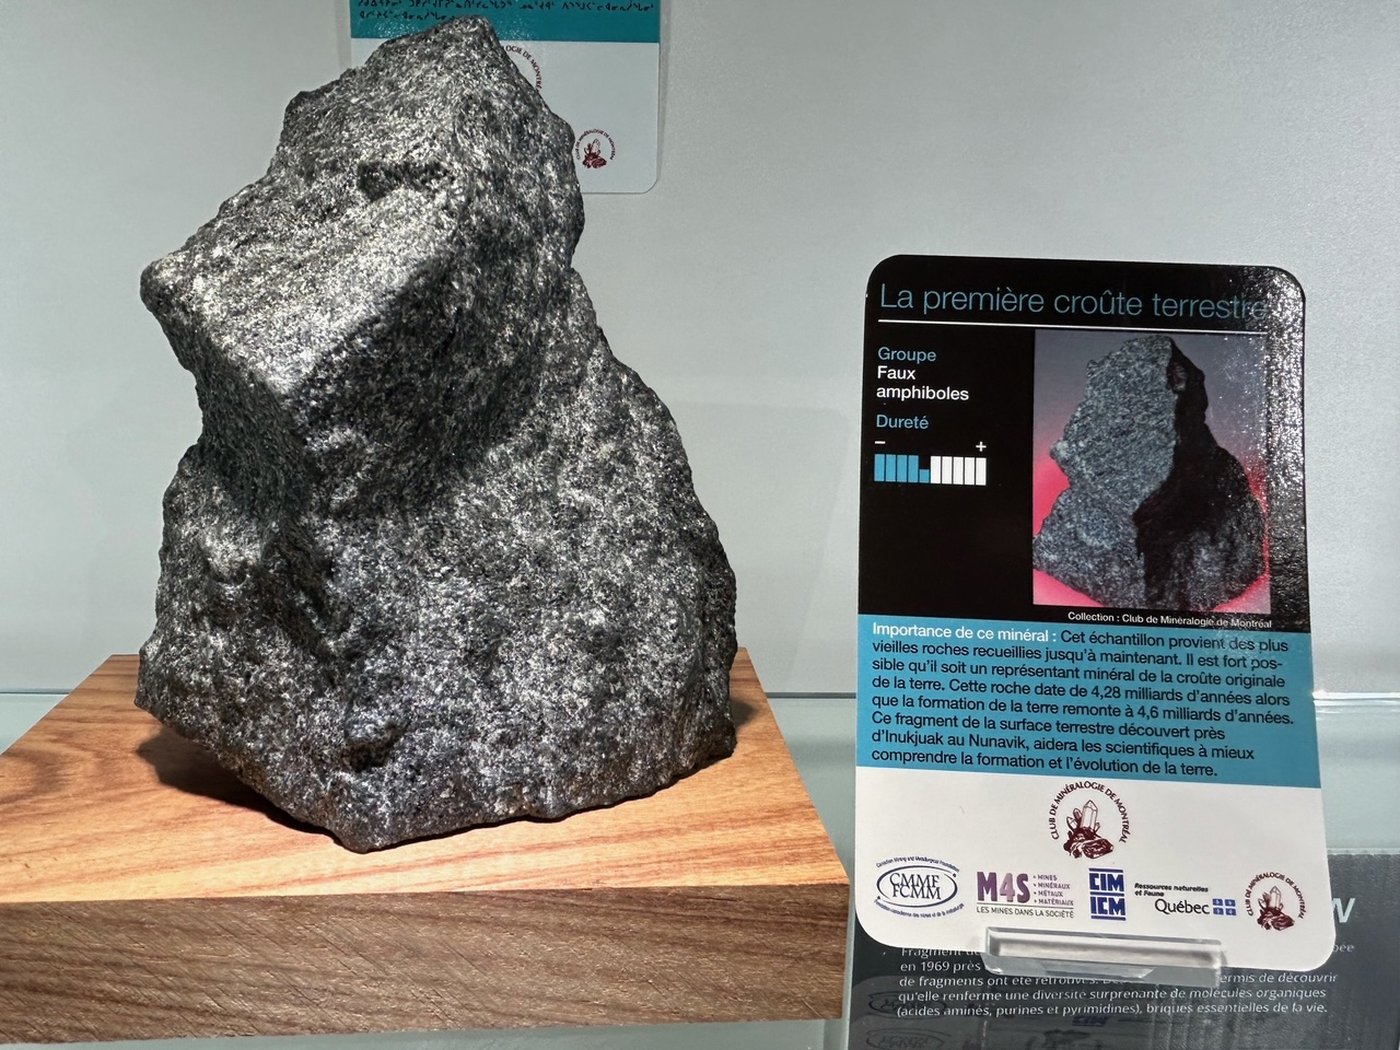 Oldest rock ever found on Earth on display at Safari Park